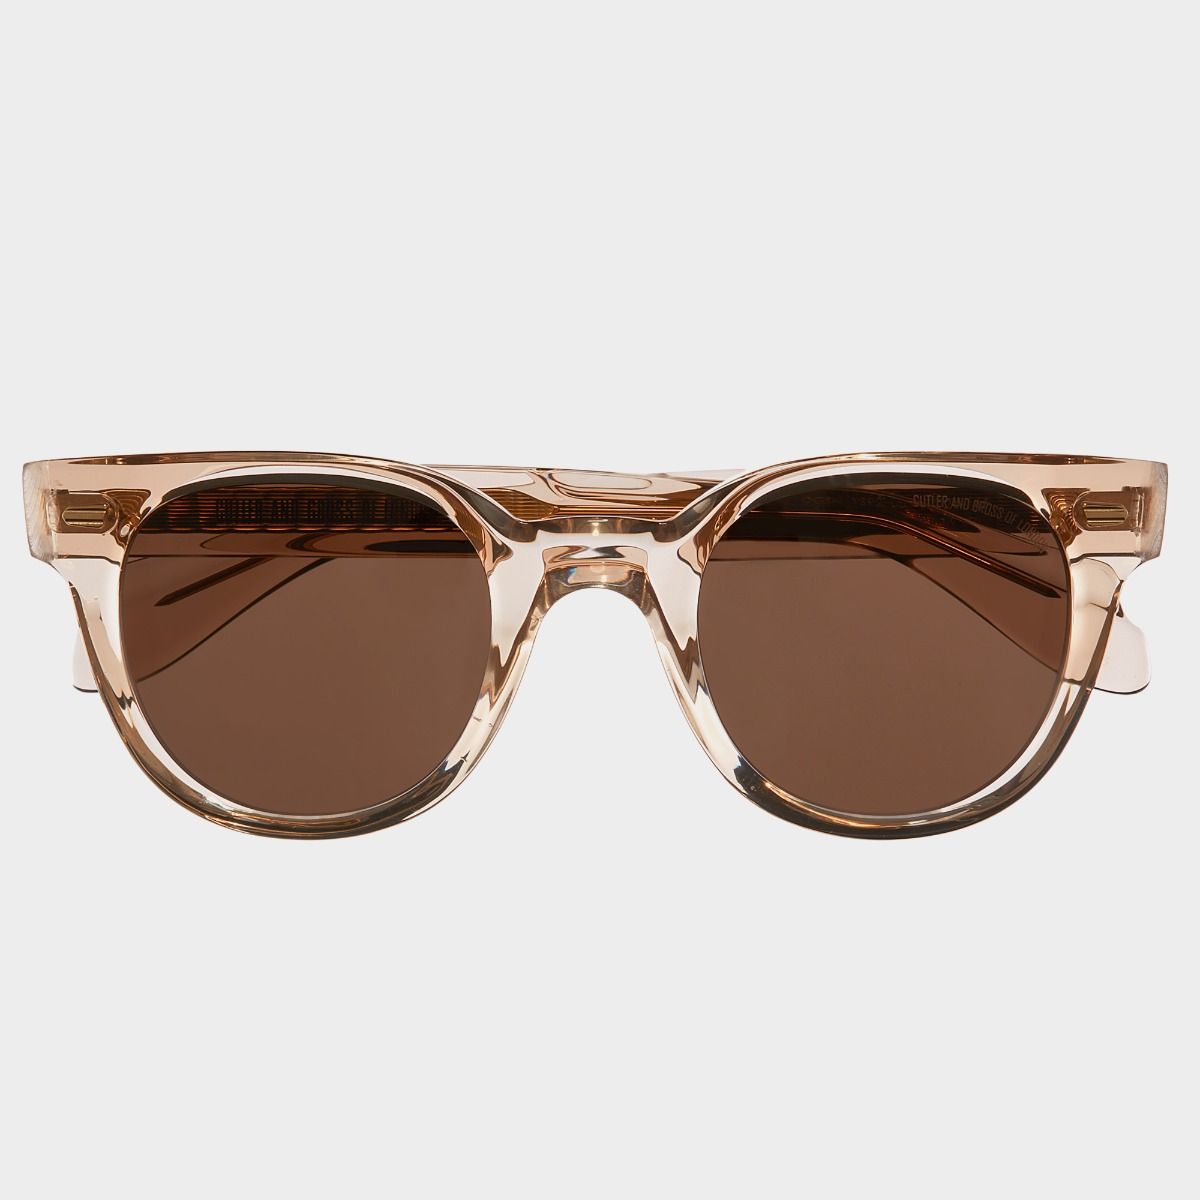 Cutler and Gross, 1392 Round Sunglasses - Granny Chic